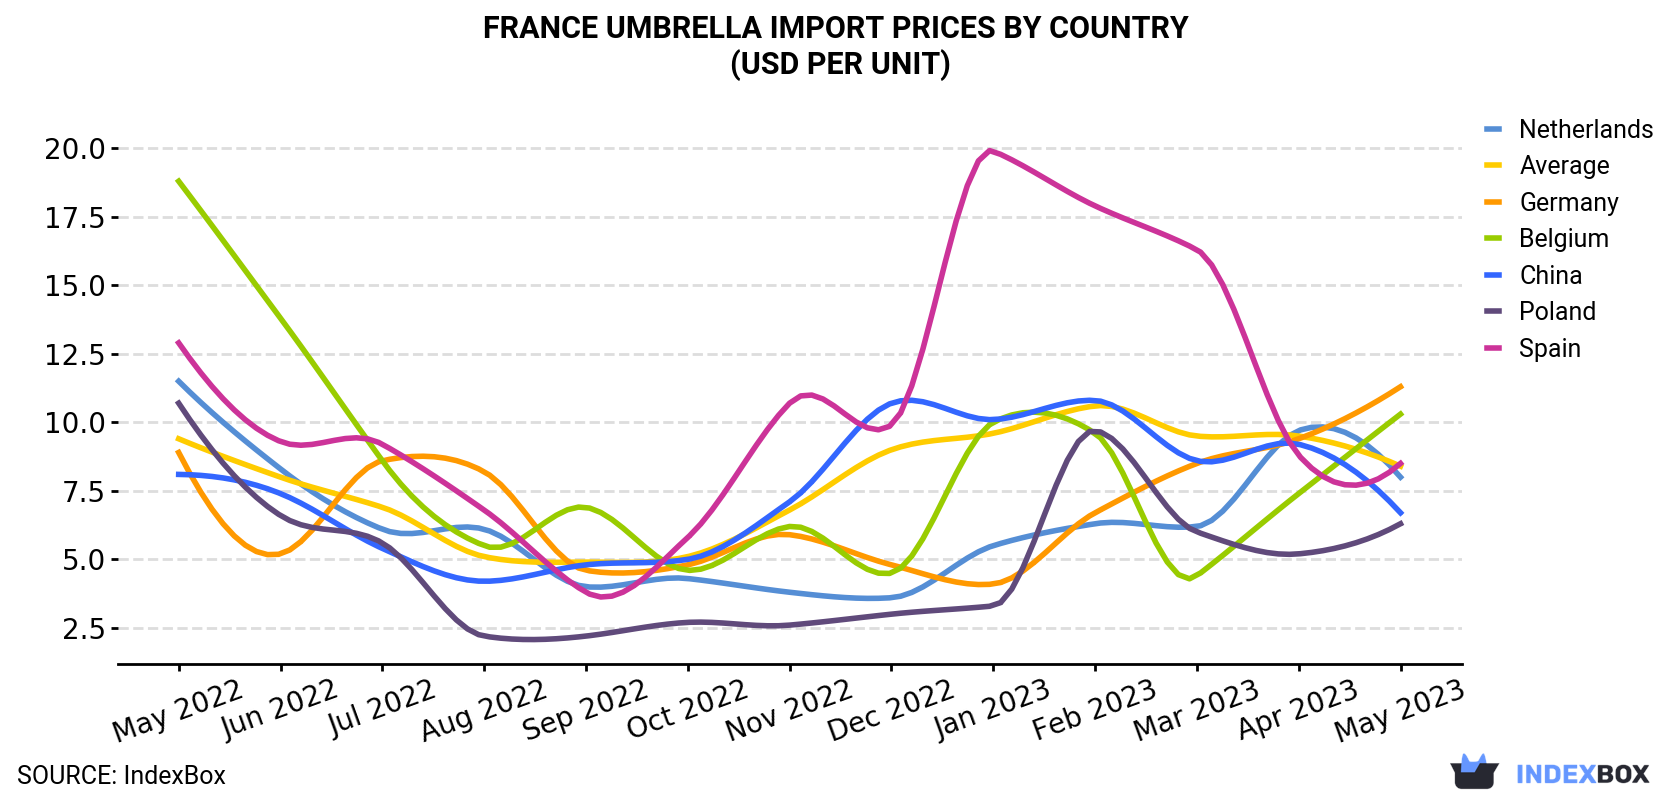 France Umbrella Import Prices By Country (USD Per Unit)